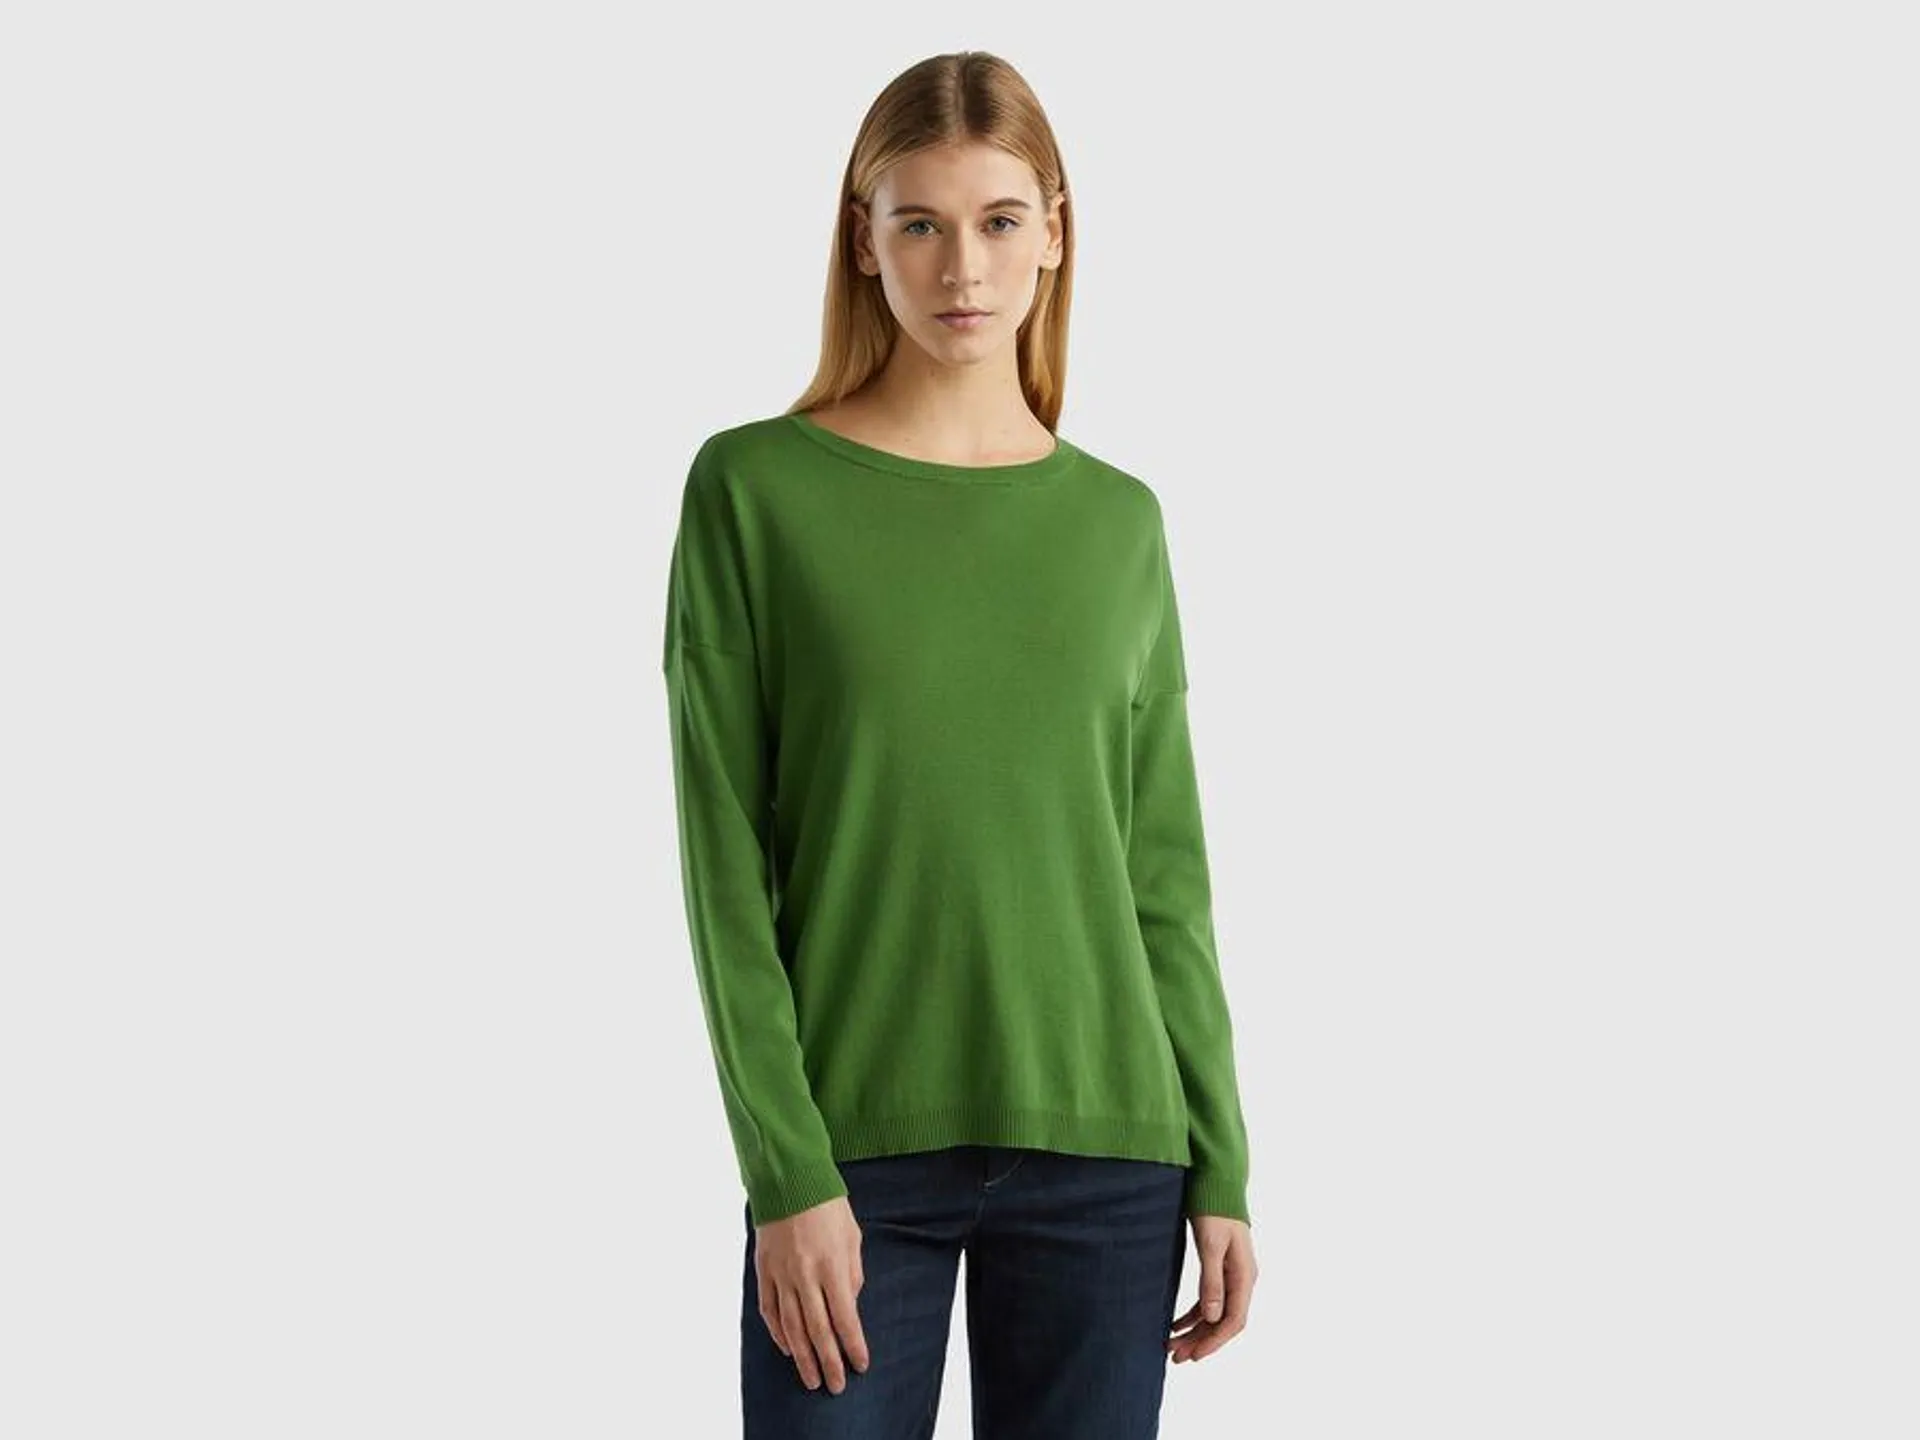 Cotton sweater with round neck